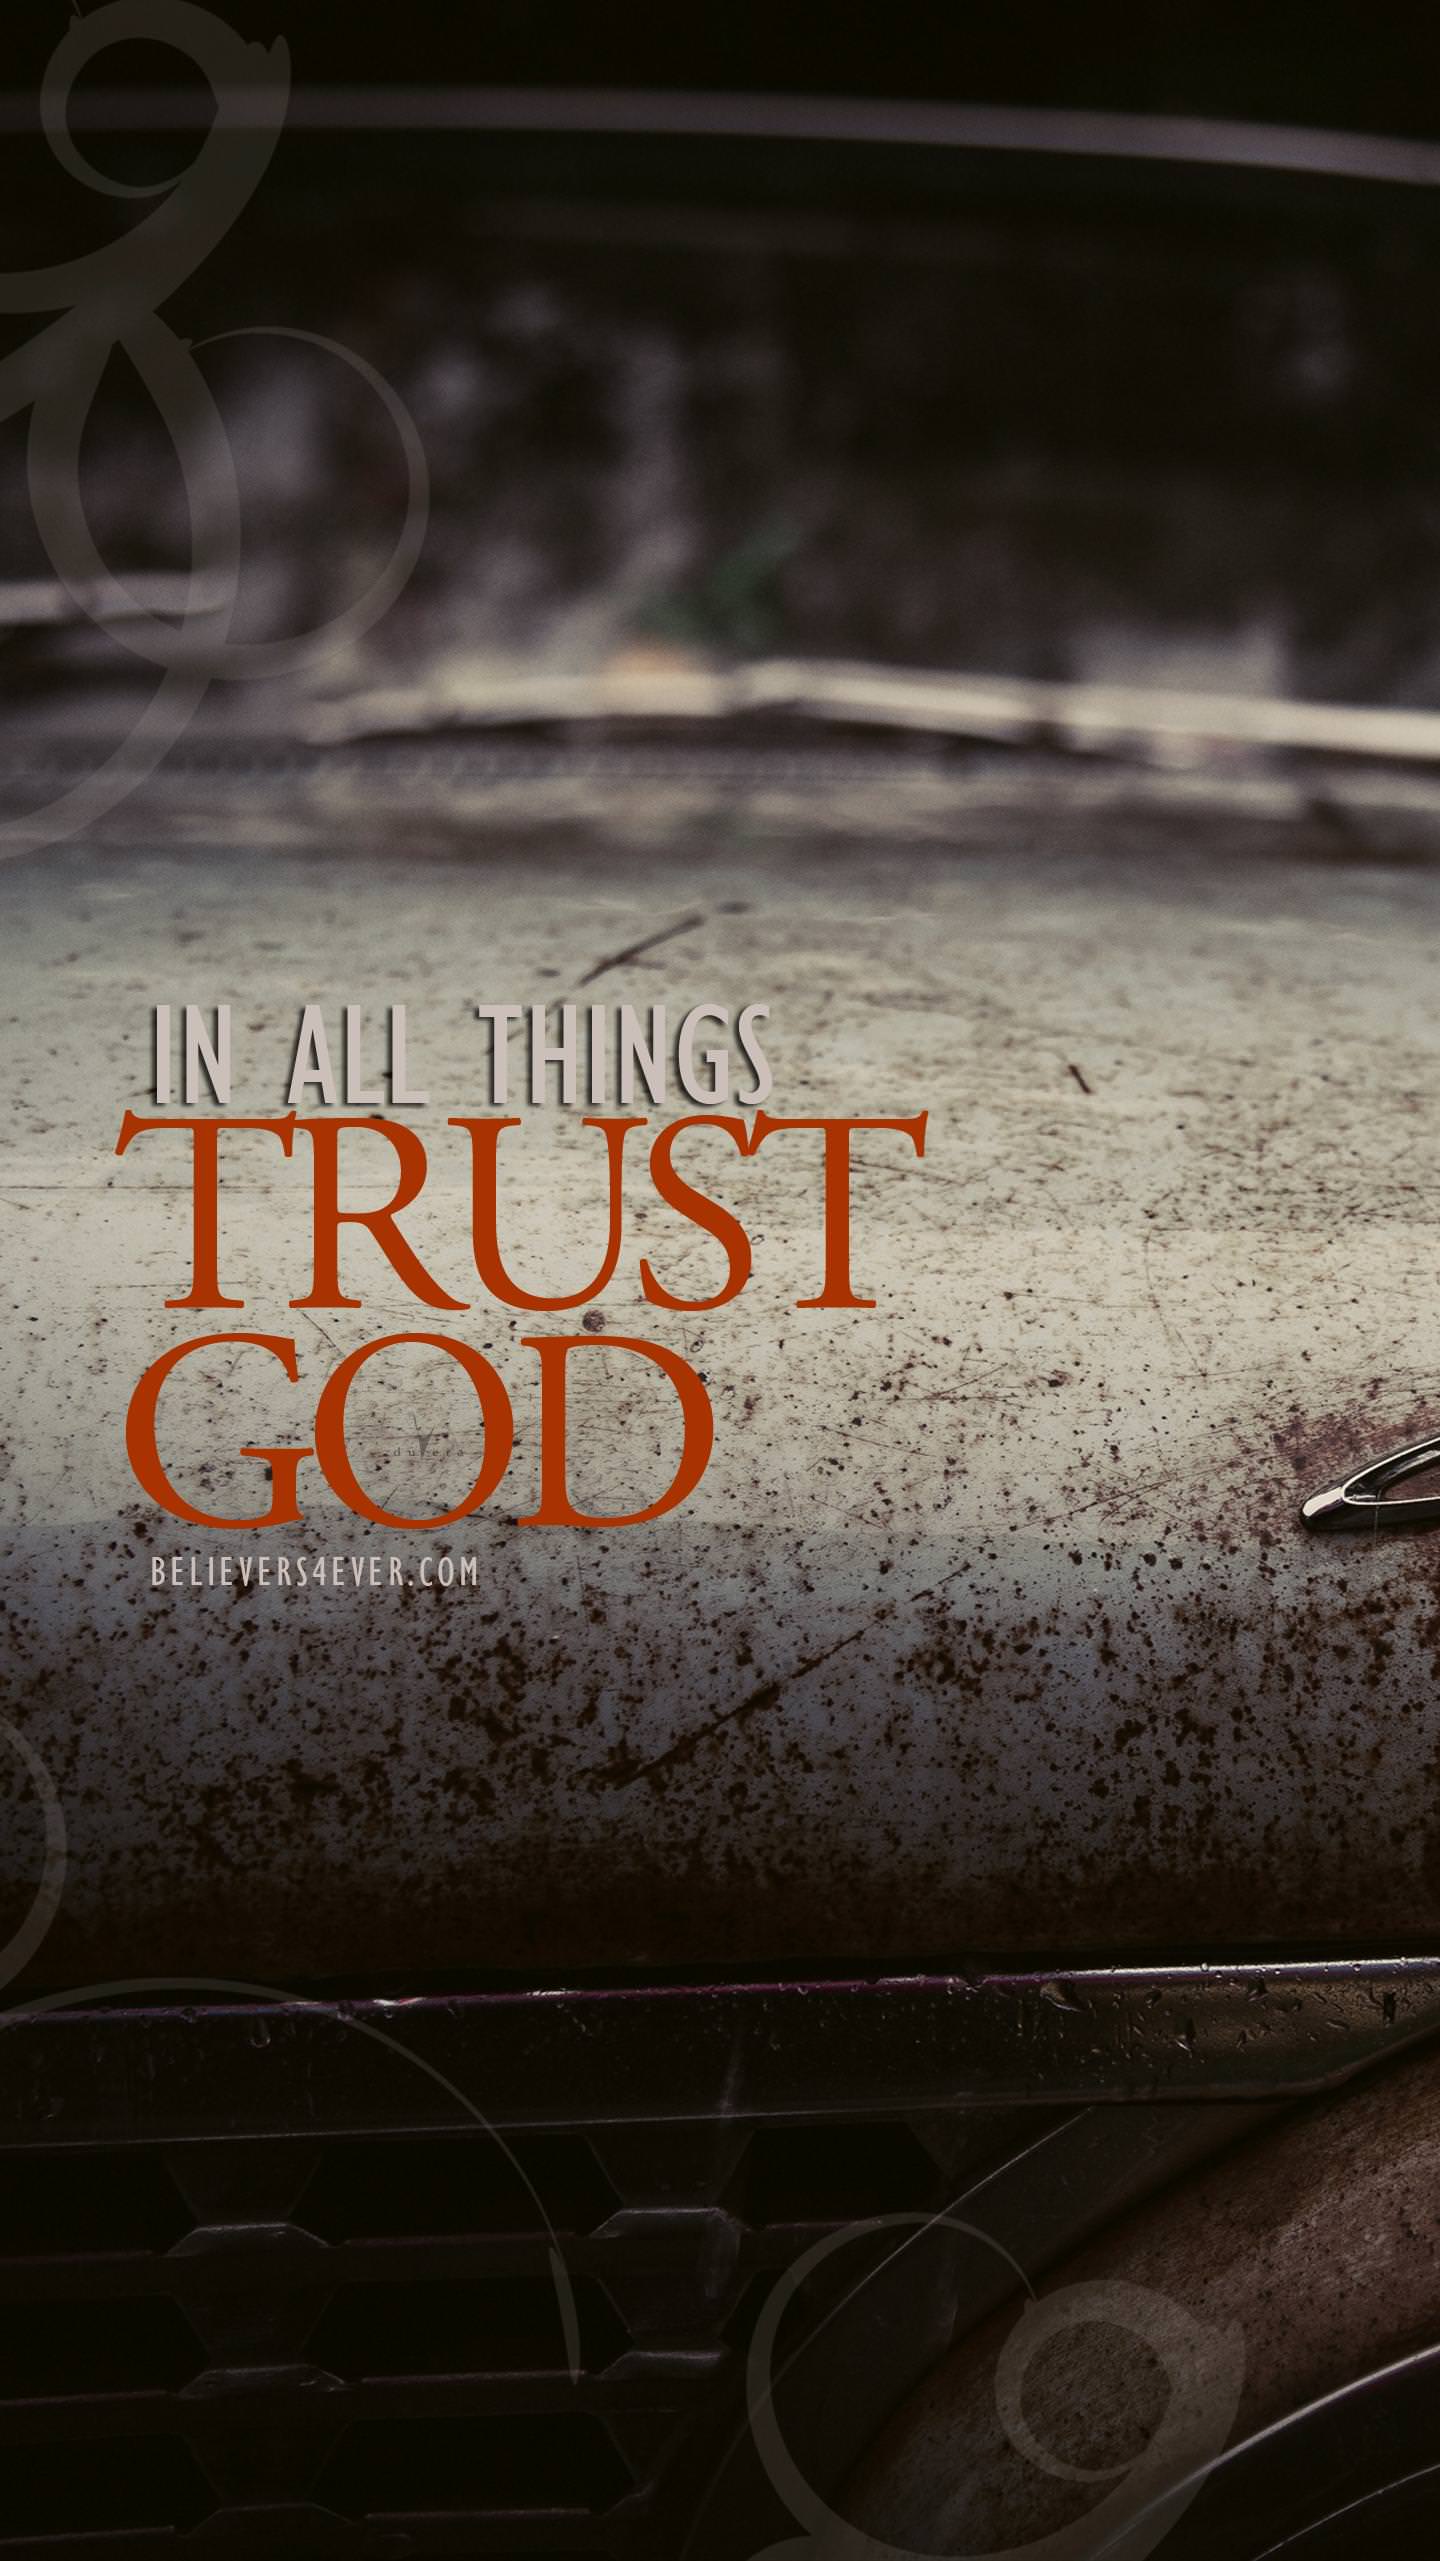 In all things trust God